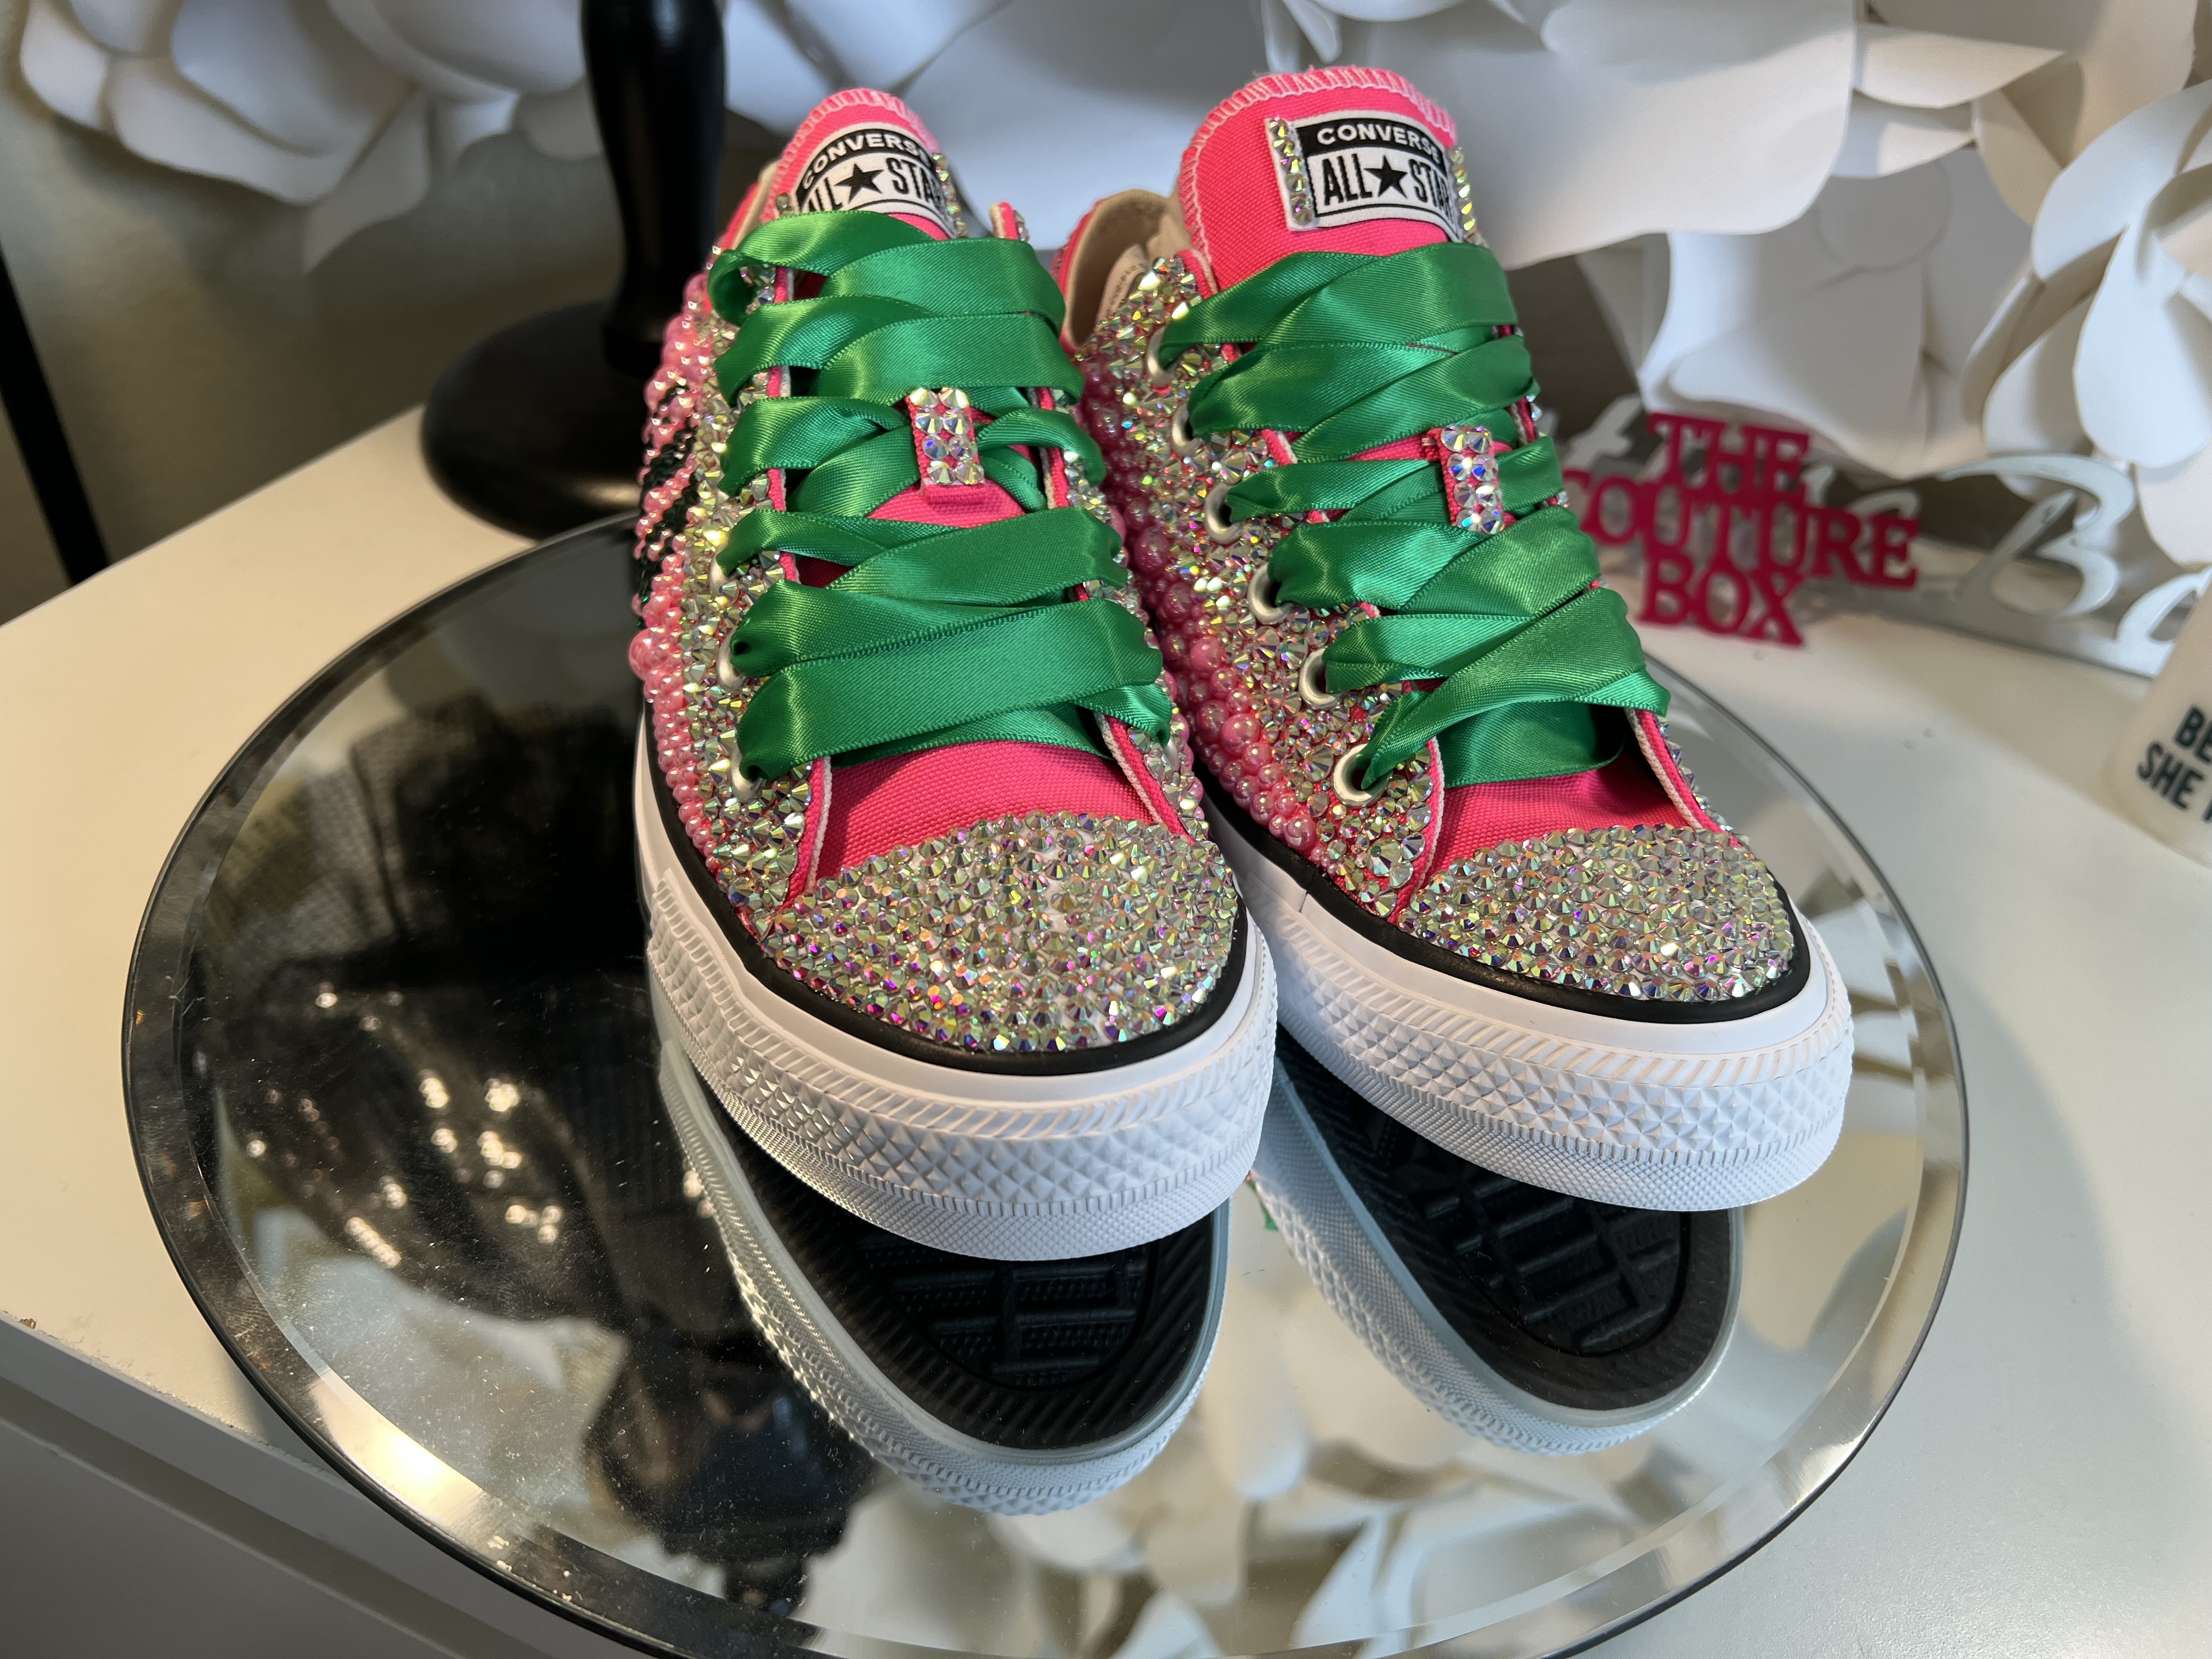 AKA Bling Sneakers -   Bling converse, Bling shoes, Converse